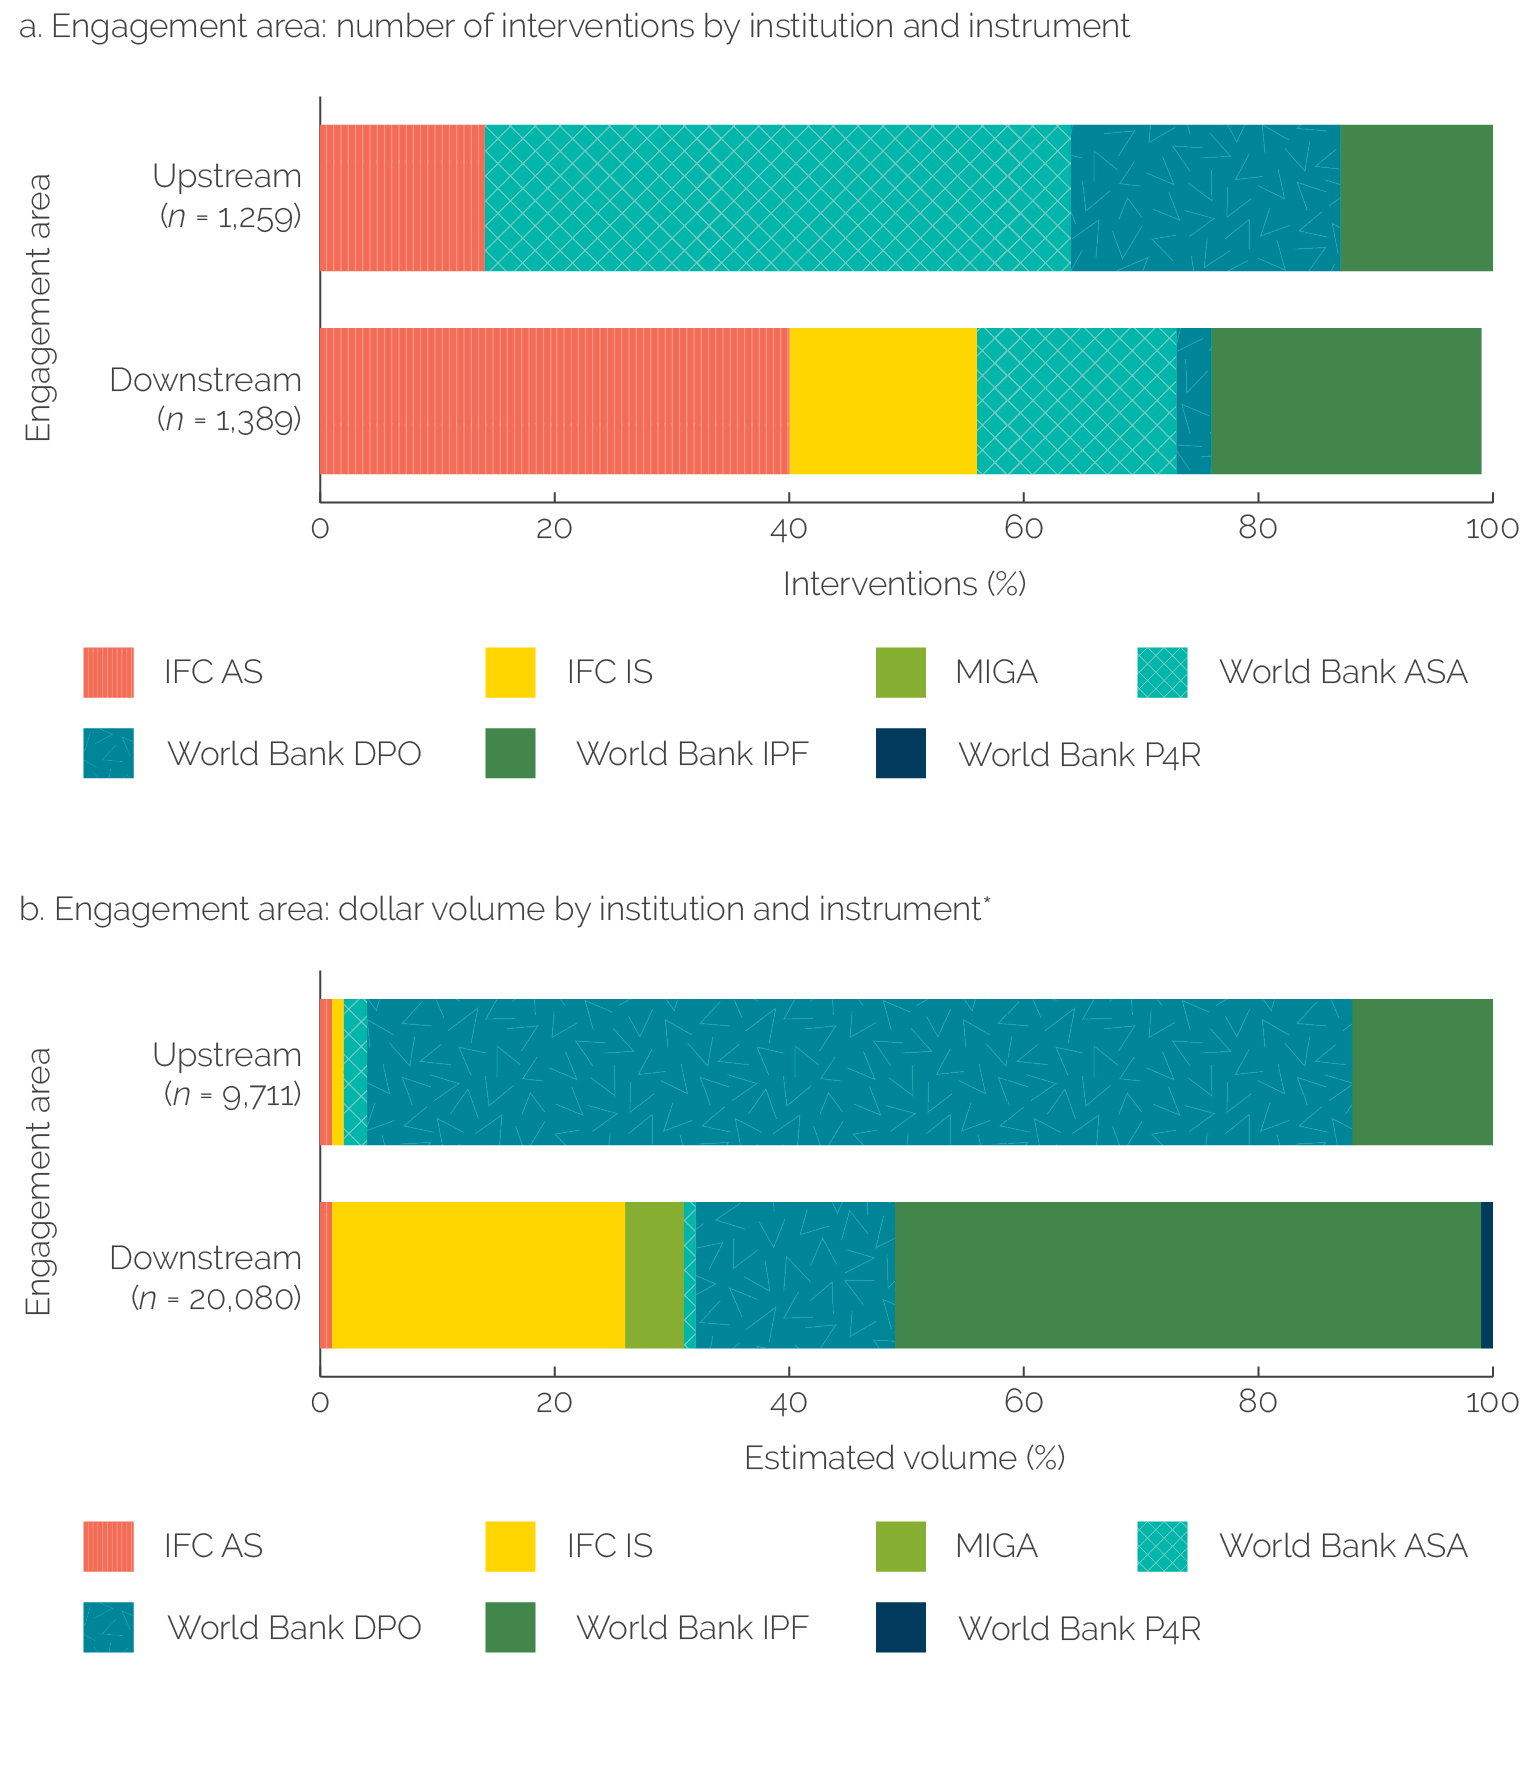 In panel A, a 100% stacked bar chart shows that, by number of projects, World Bank A S A and D P O’s focus on upstream (policy, regulatory, institutional) engagement areas, whereas I F C advisory and investment services and World Bank investment lending focus heavily on downstream engagement areas. In panel B, a shows that, by commitment volume, D P O’s are of overwhelming importance for upstream engagement, whereas World Bank and I F C investment lending are important for downstream engagement.